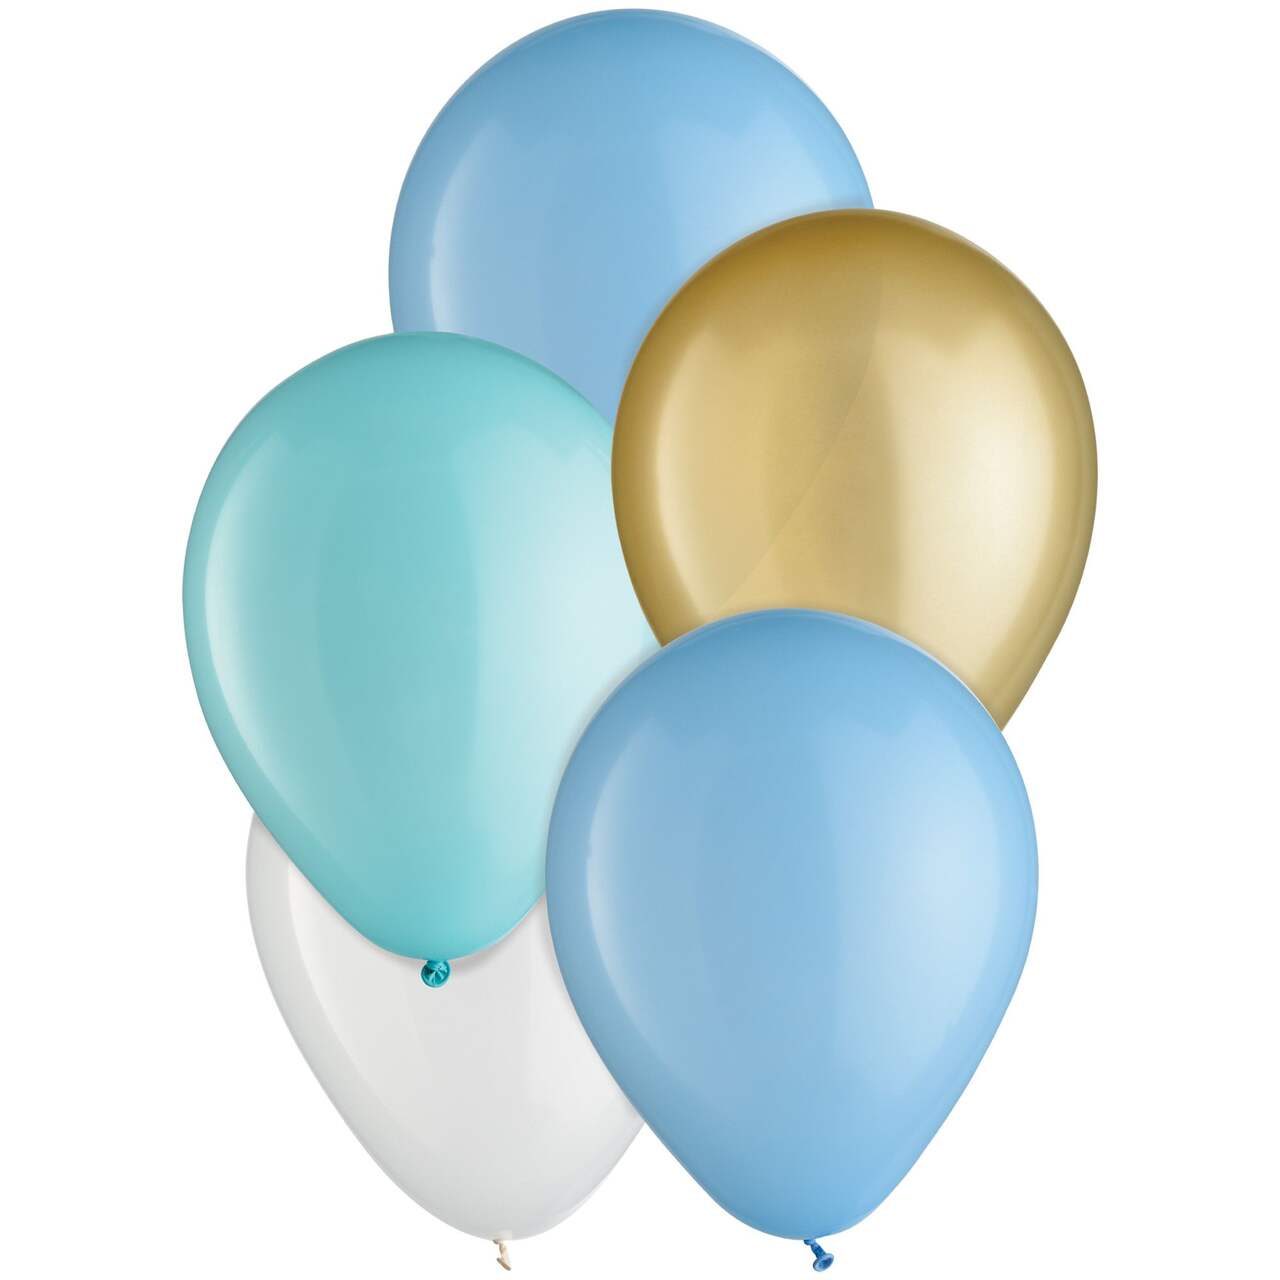 Round Pearl Latex Balloons, Blue/Gold/Teal, 11-in, 15-pk, for